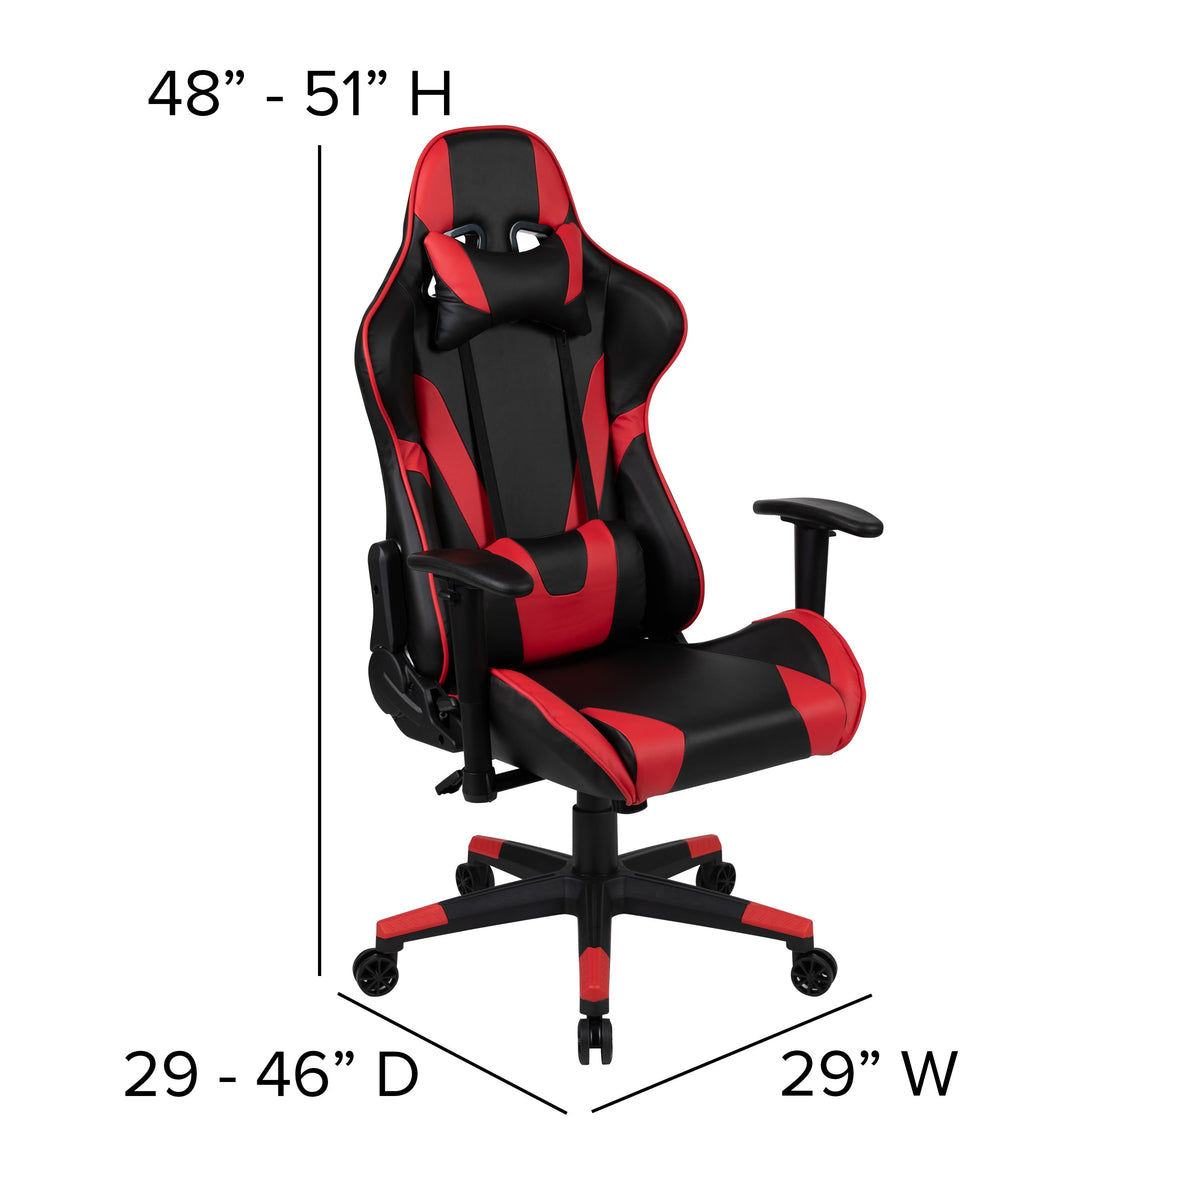 Red |#| Desk Bundle - Red Gaming Desk, Cup Holder, Headphone Hook and Reclining Chair